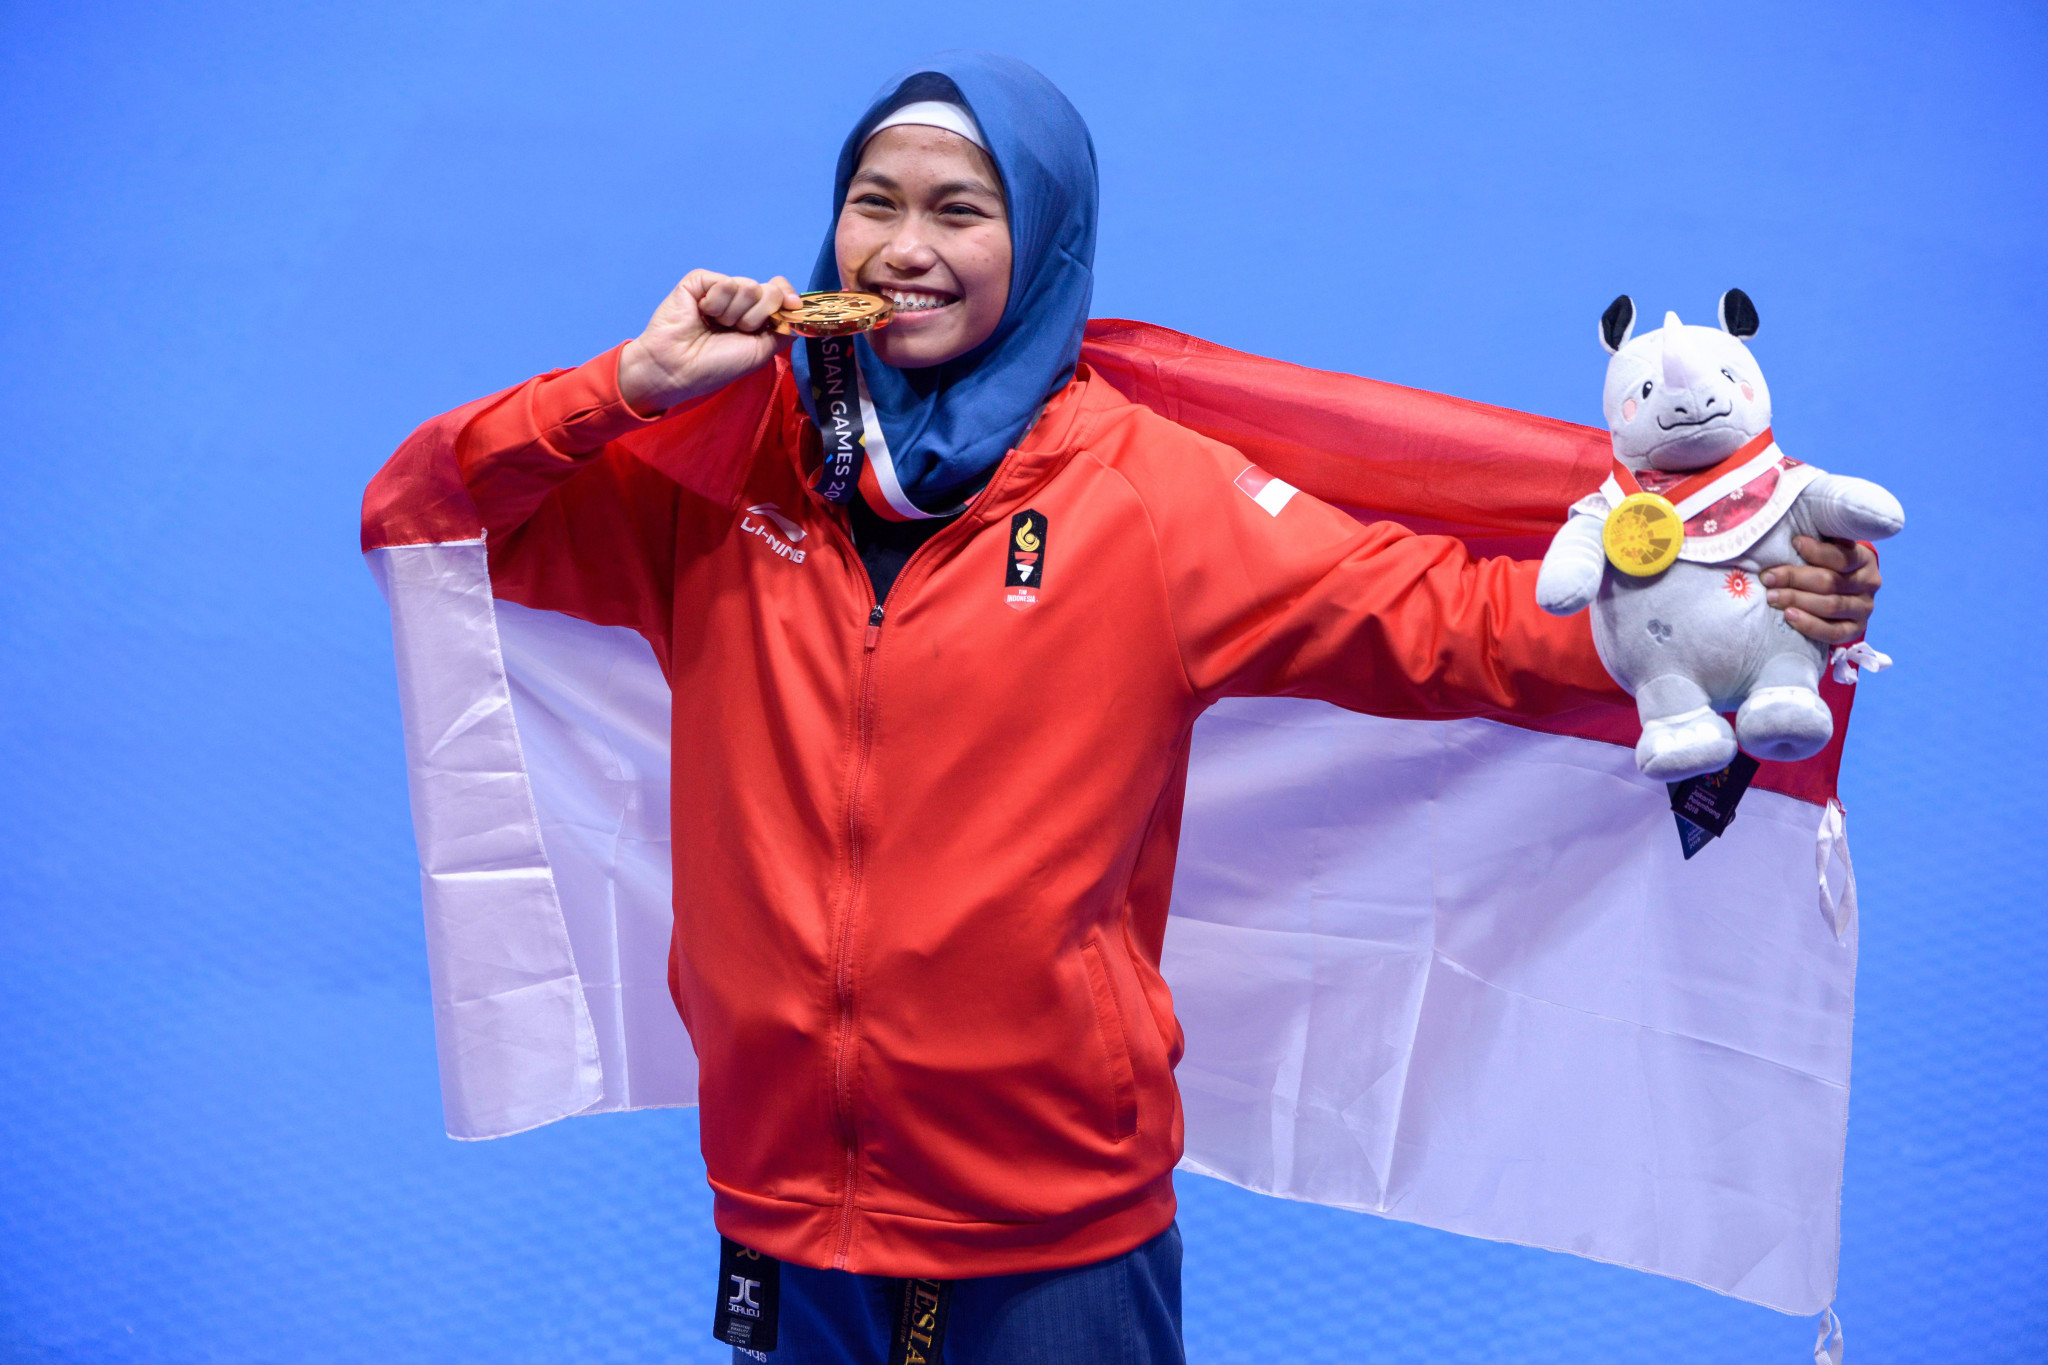 Indonesia's Defia Rosmaniar won her country's first gold of the Asian Games today, in the women's individual poomsae taekwondo final ©Getty Images